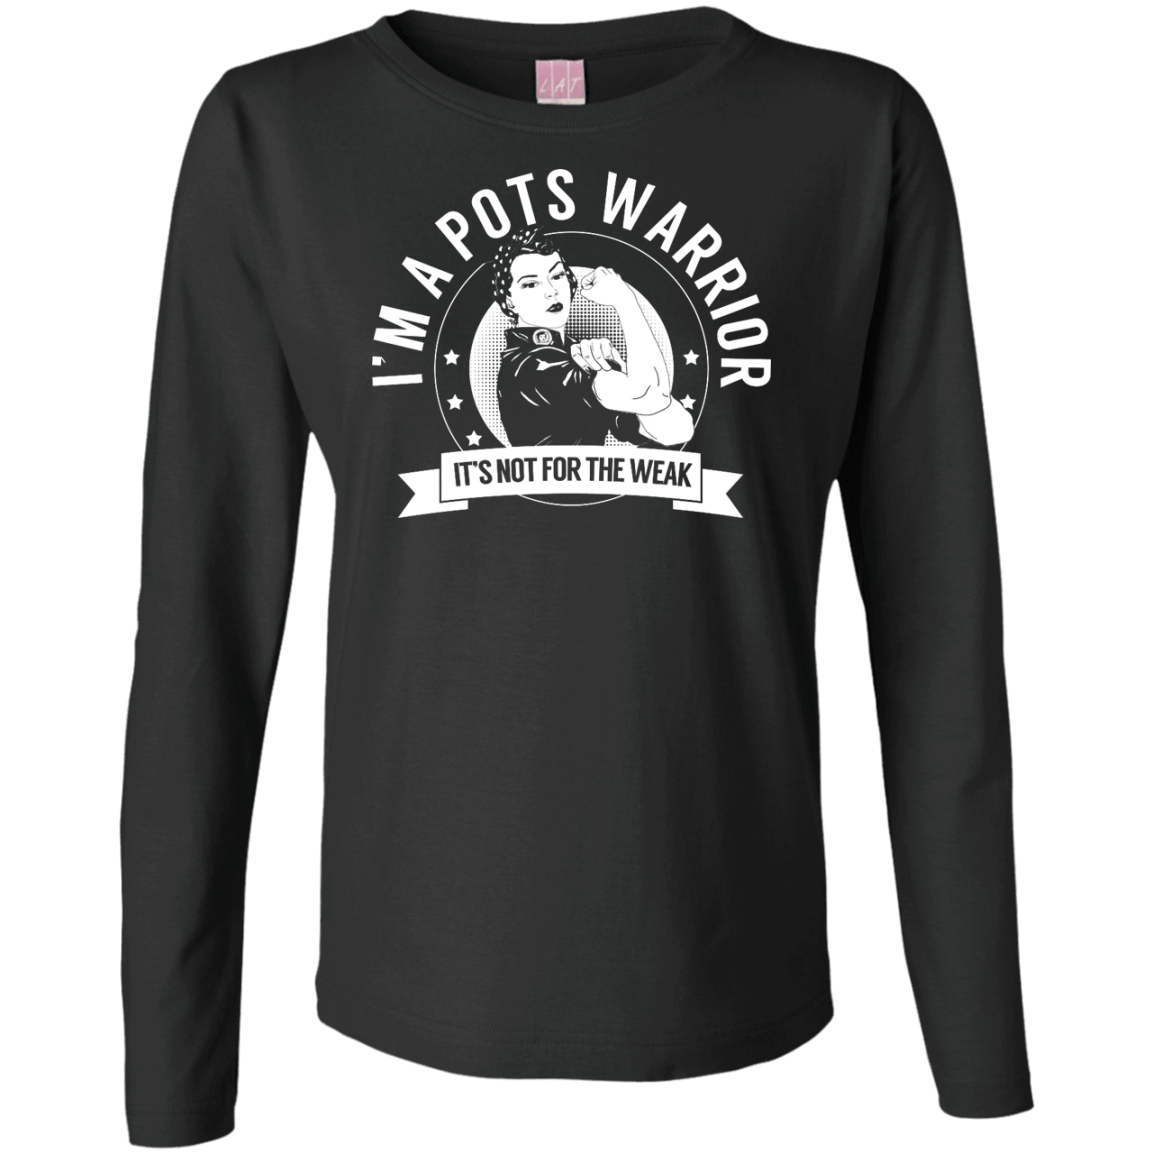 Postural Orthostatic Tachycardia Syndrome - POTS Warrior Not For The Weak Womens Long Sleeve Shirt - The Unchargeables